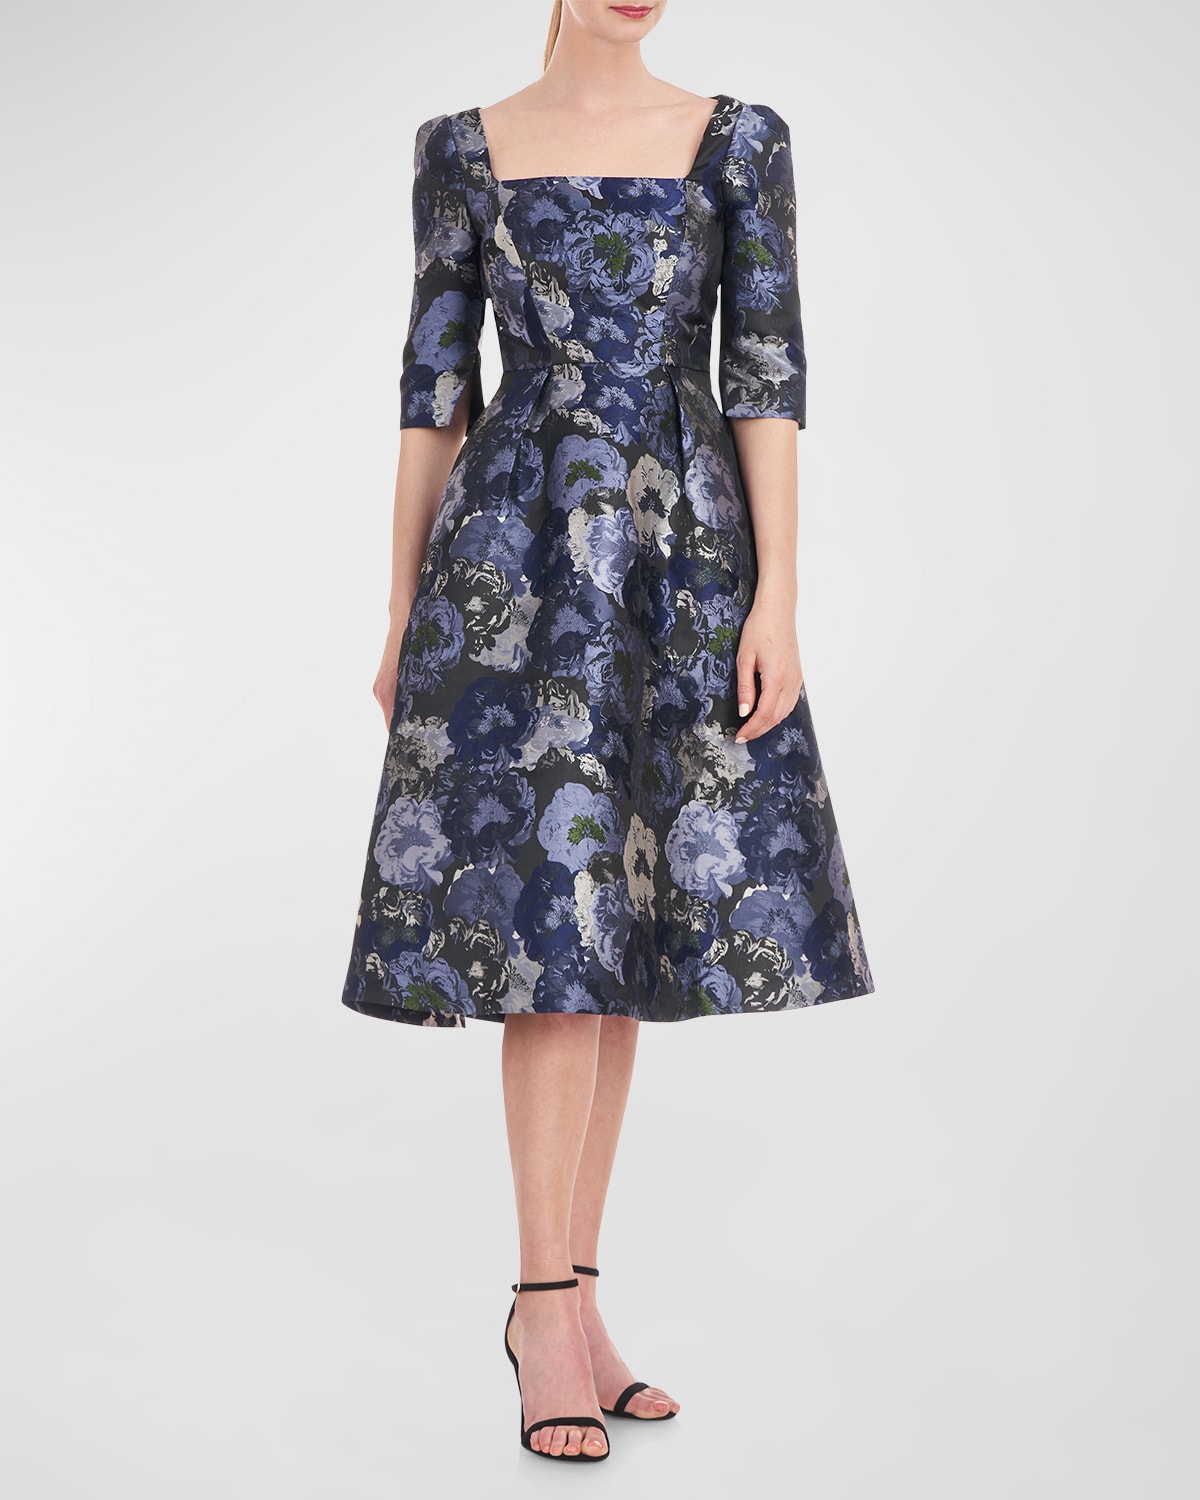 KAY UNGER PIPER PLEATED FLORAL JACQUARD MIDI DRESS